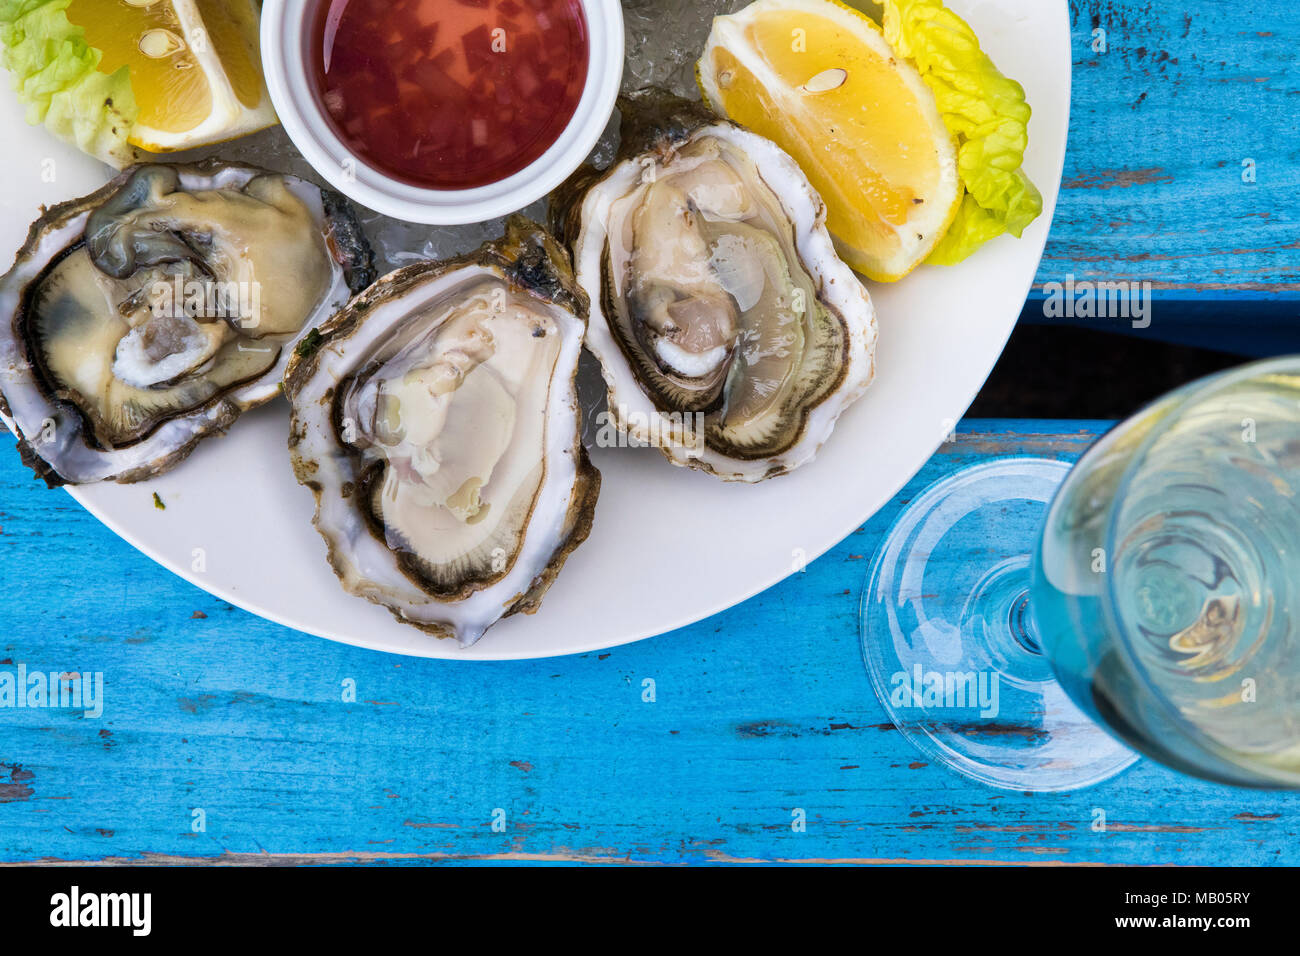 Oysters and champagne with lemon wedge and mignette dressing on white plate on blue distressed vintage table. Stock Photo